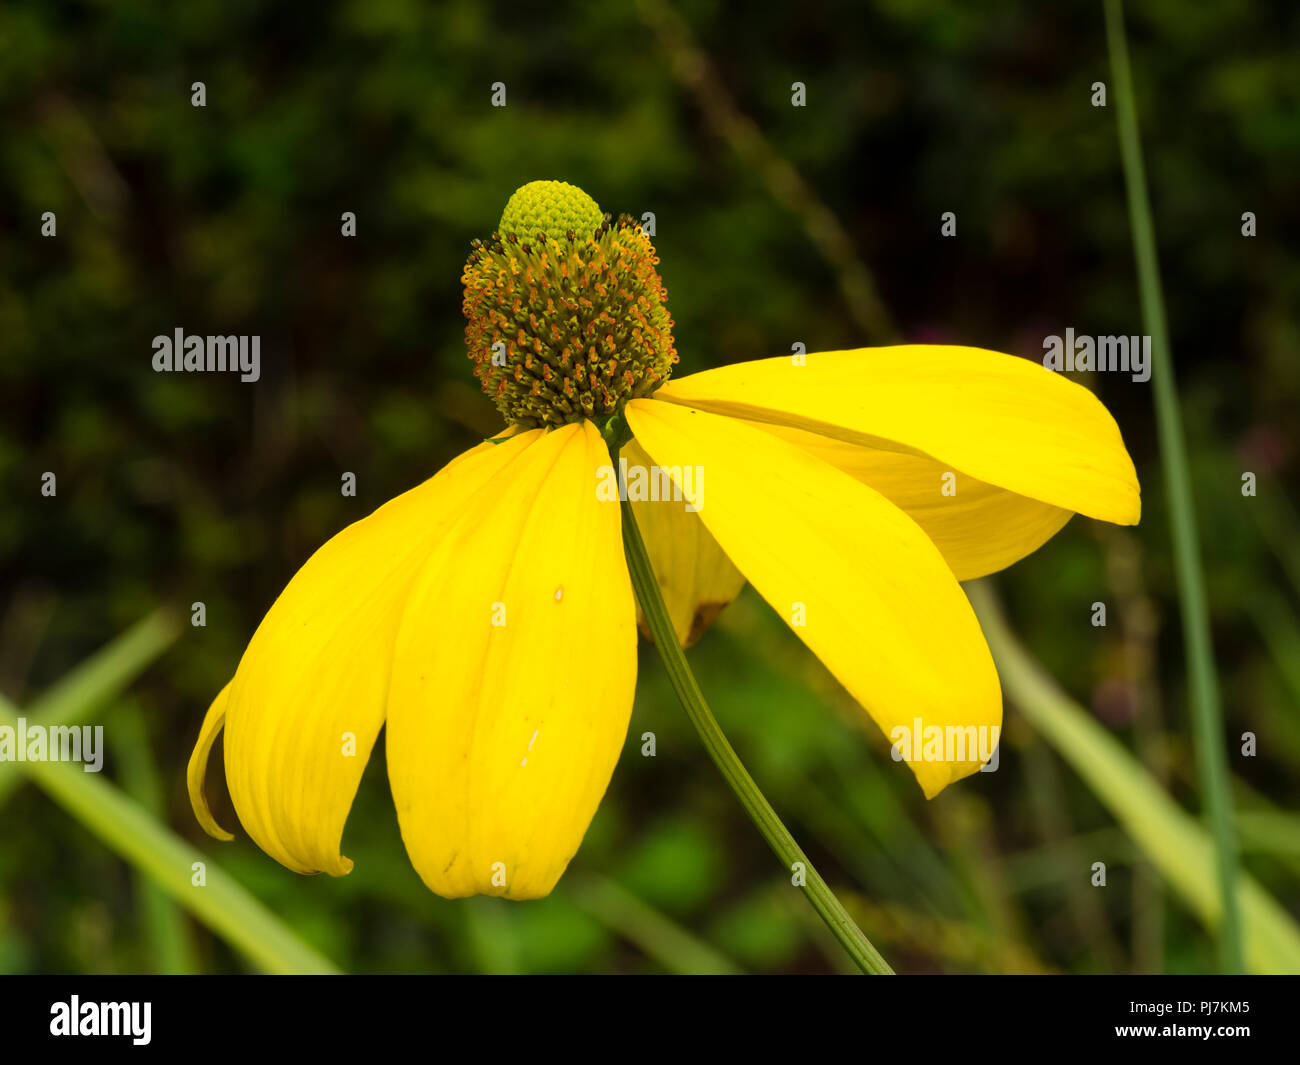 Yellow, late summer flower of the hardy perennial cut leaved cone flower, Rudbeckia laciniata 'Herbstsonne' Stock Photo